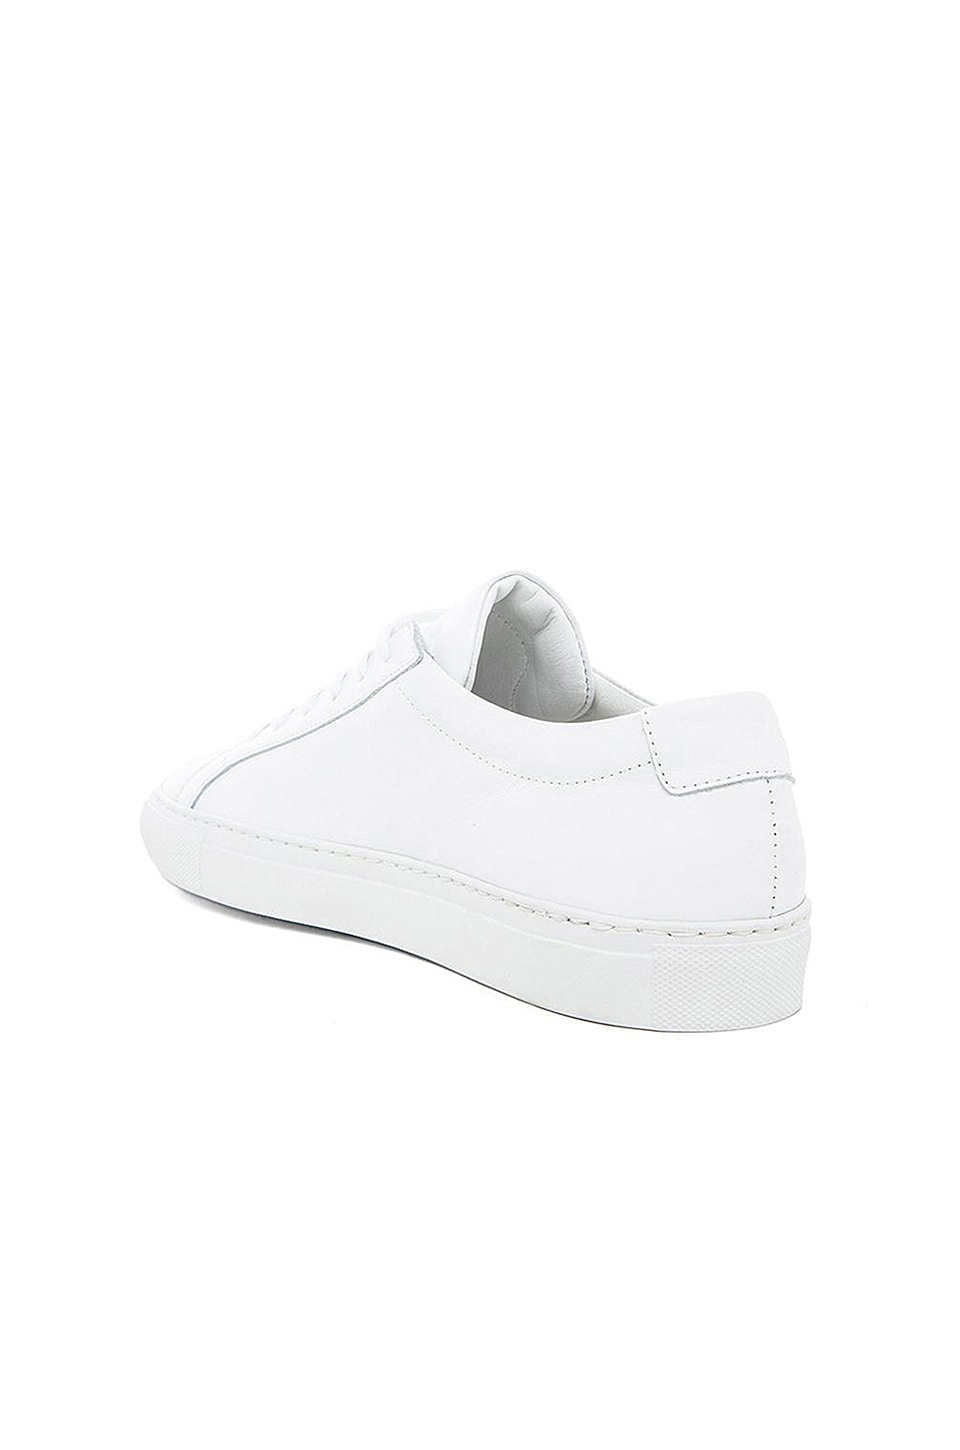 Common Projects Original Leather Achilles Low in White | REVOLVE